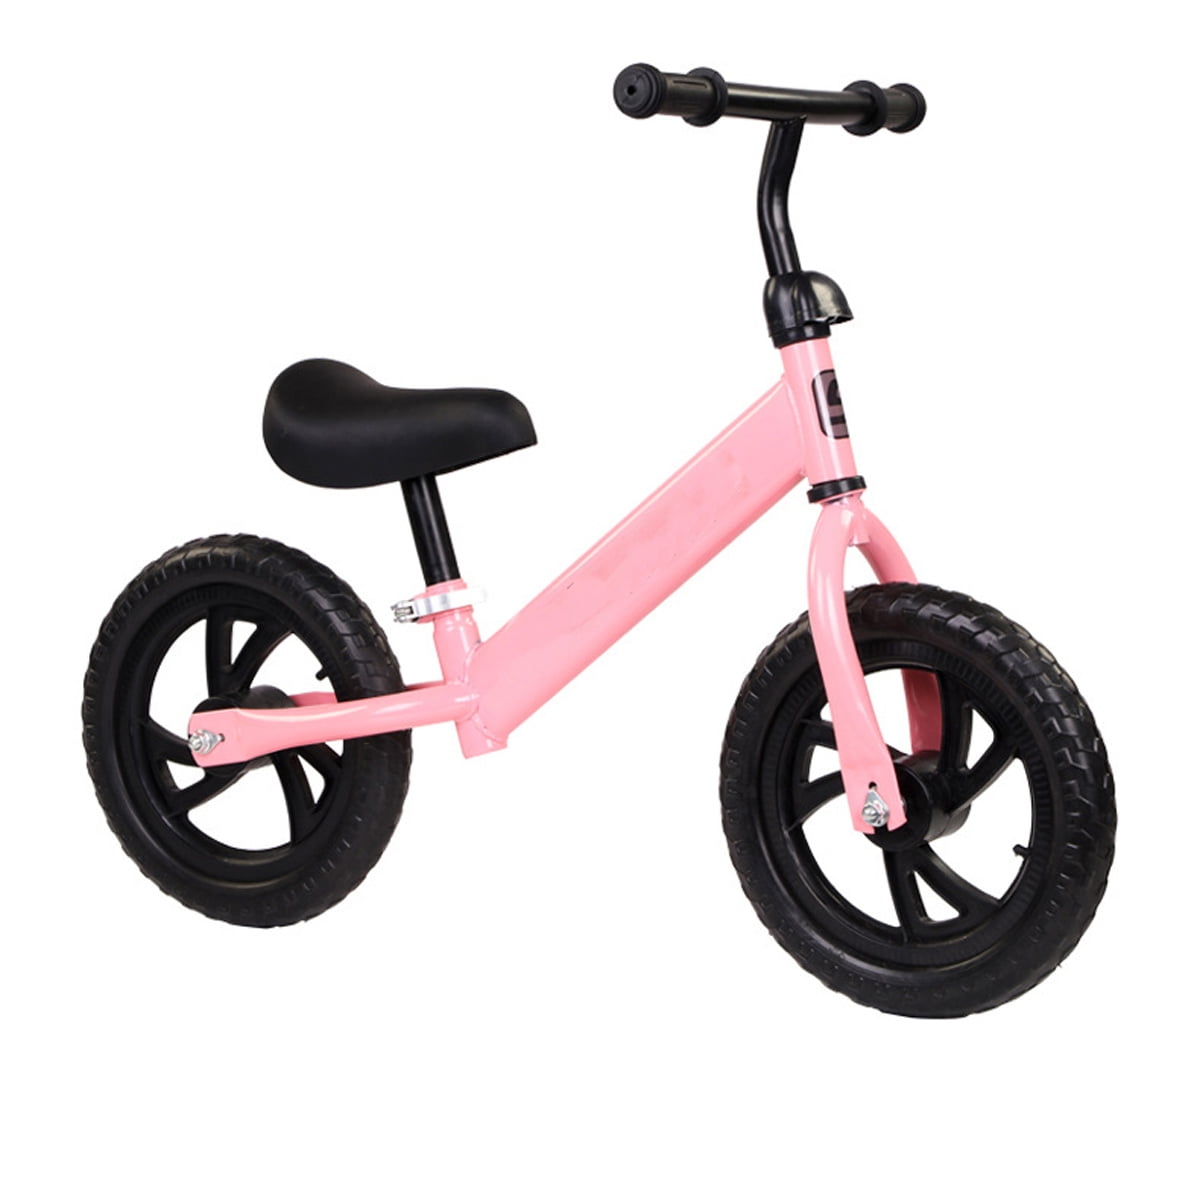 Kids Balance Bike No Pedal Bicycle Children Lightweight 12 Balance Bike No Pedal Air Tires Anti-slip Handlebar Push And Stride Toddlers Sport Training For Ages 18 Months To 6 Years Old Boys Girls For 